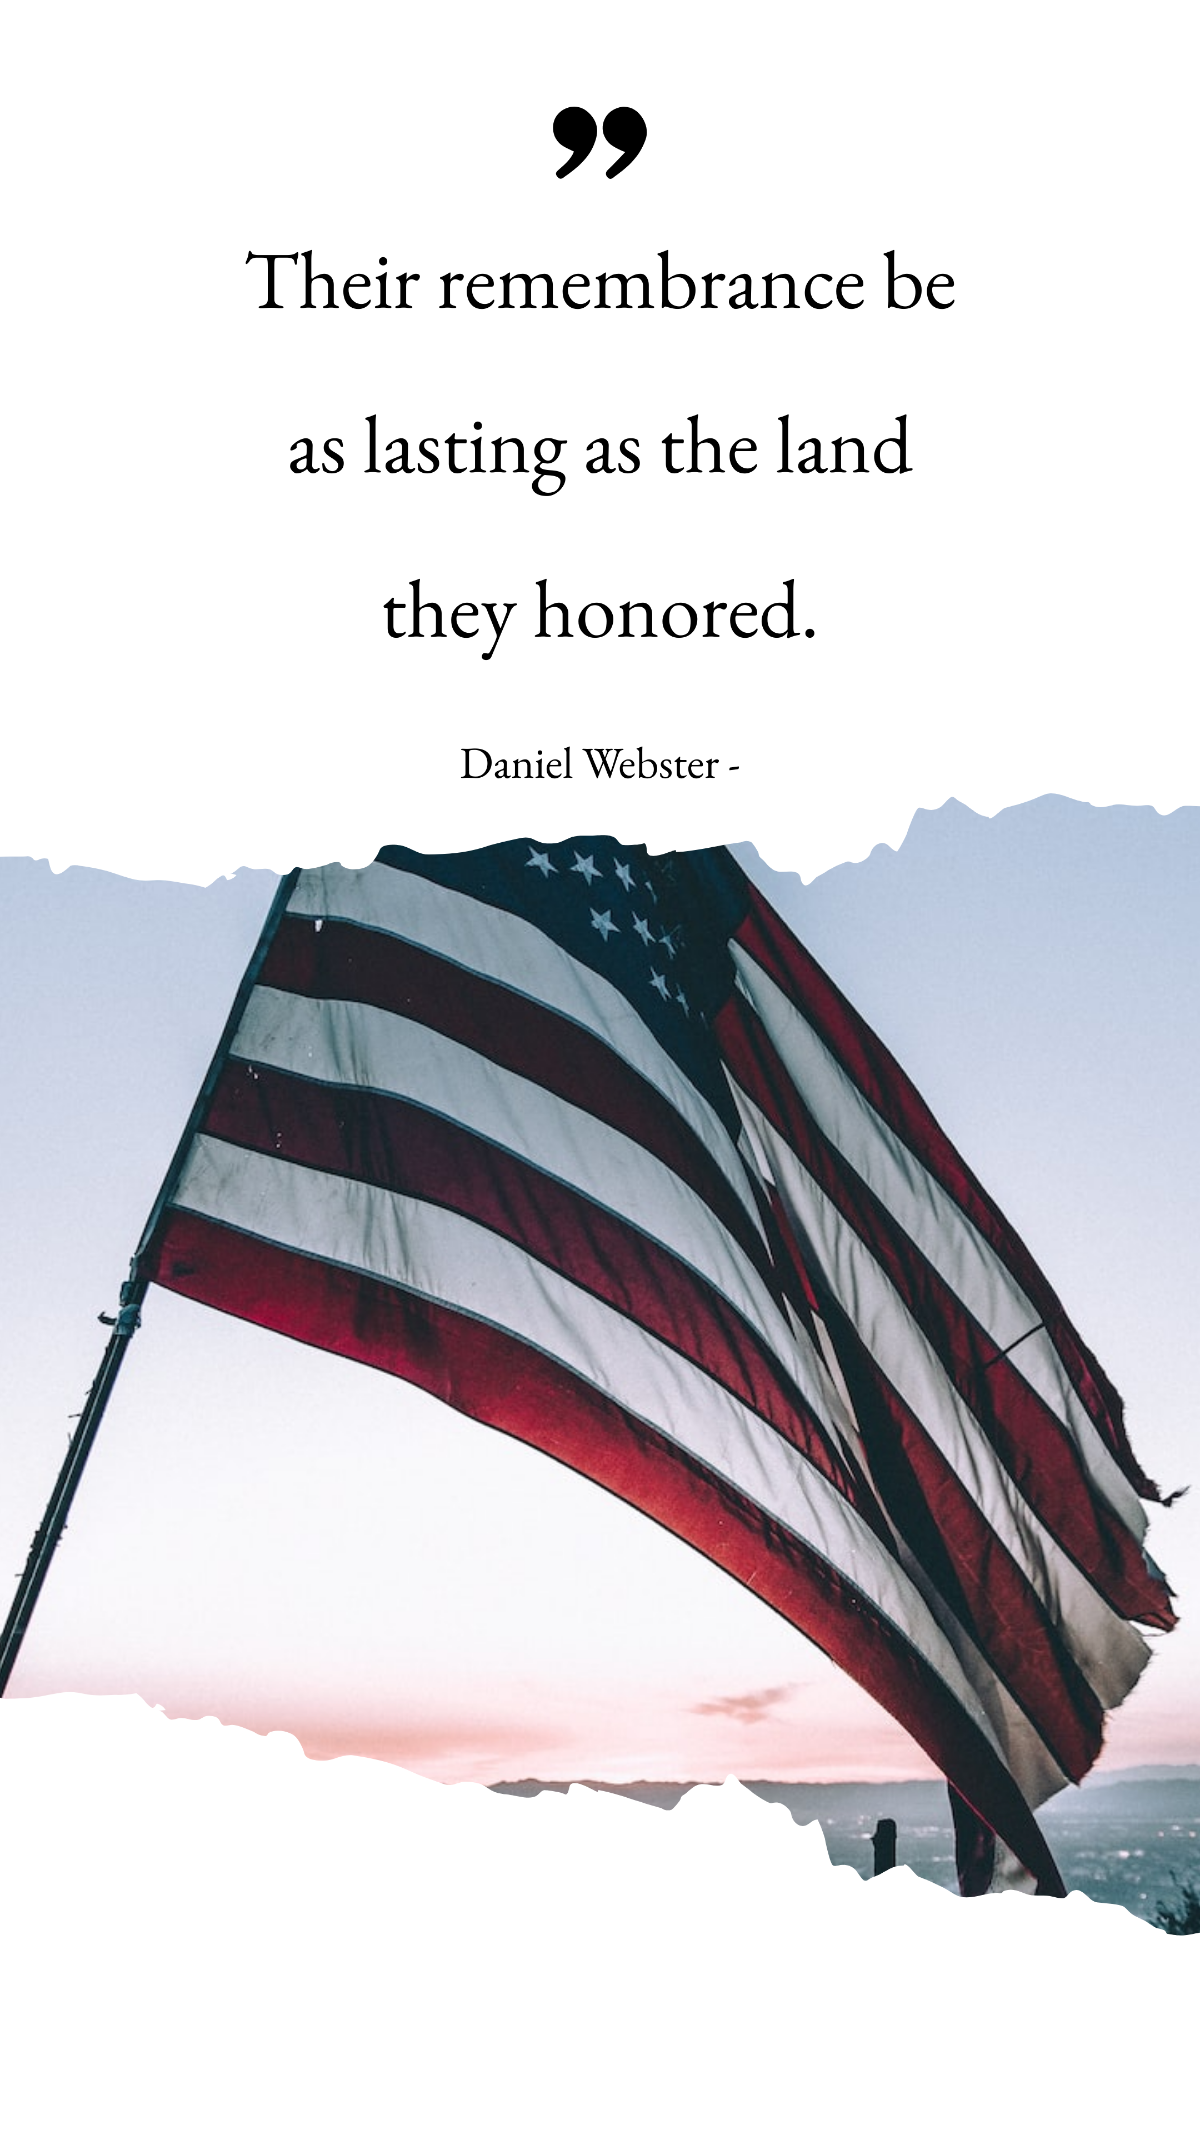 Daniel Webster - Their remembrance be as lasting as the land they honored. Template